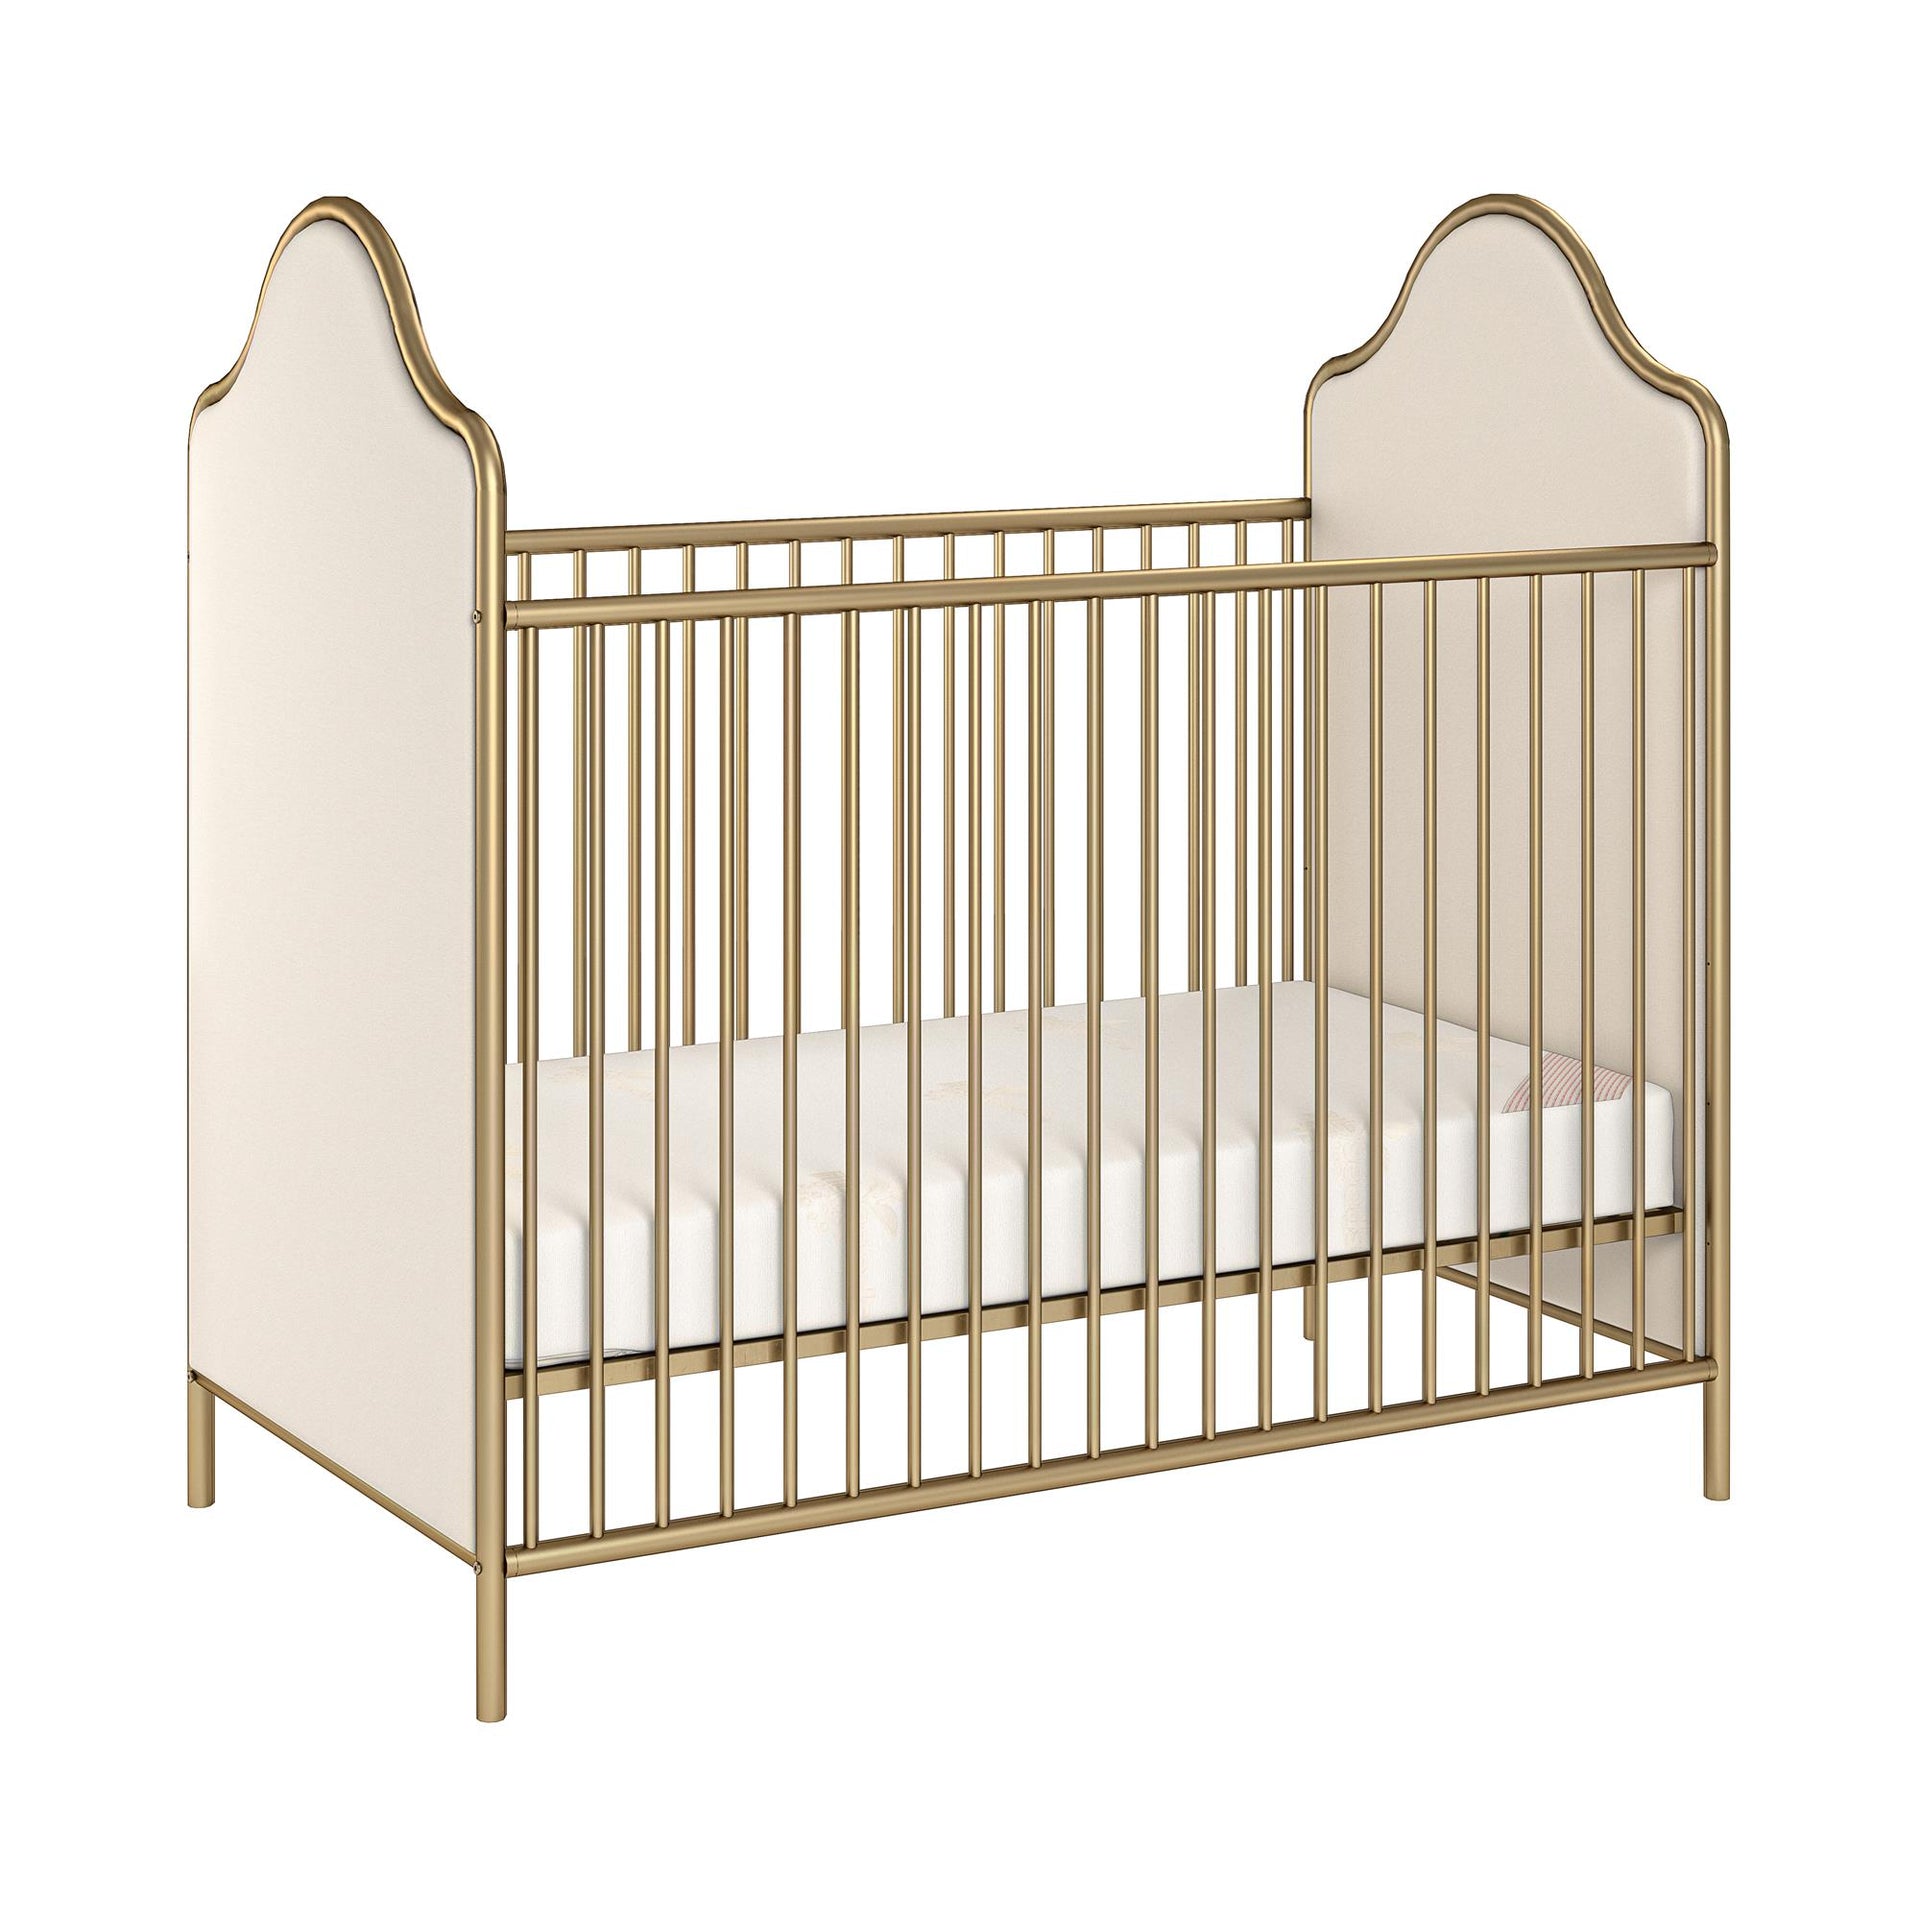 Piper Upholstered Convertible Metal Crib - Gold